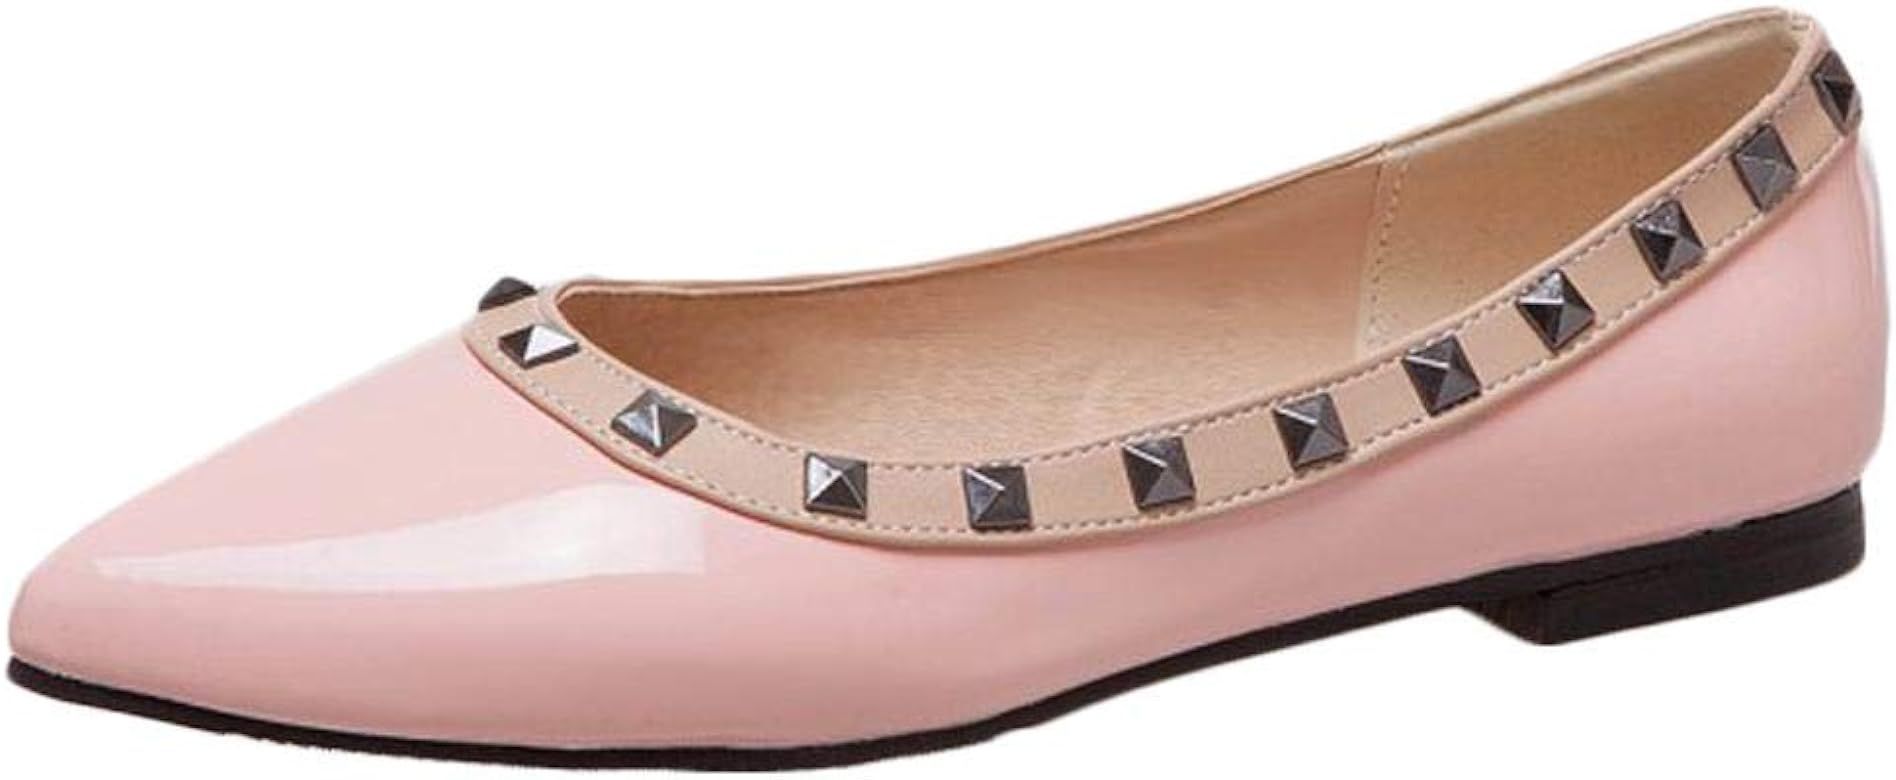 Women's Studded Pointed-Toe Flats Shoes | Amazon (US)